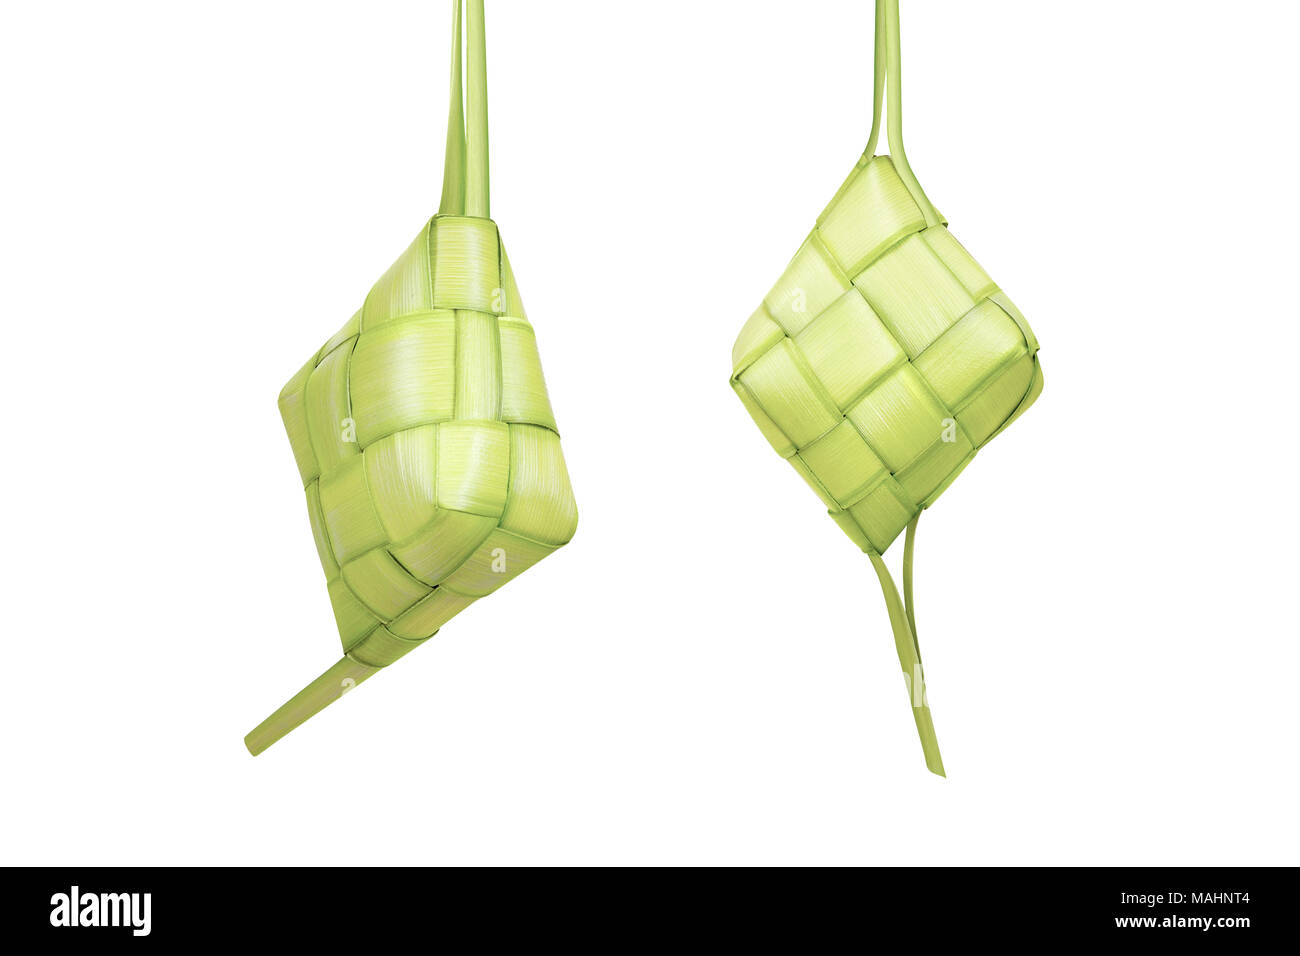 Rice dumpling or ketupat is traditional food for festive season isolated over white background Stock Photo